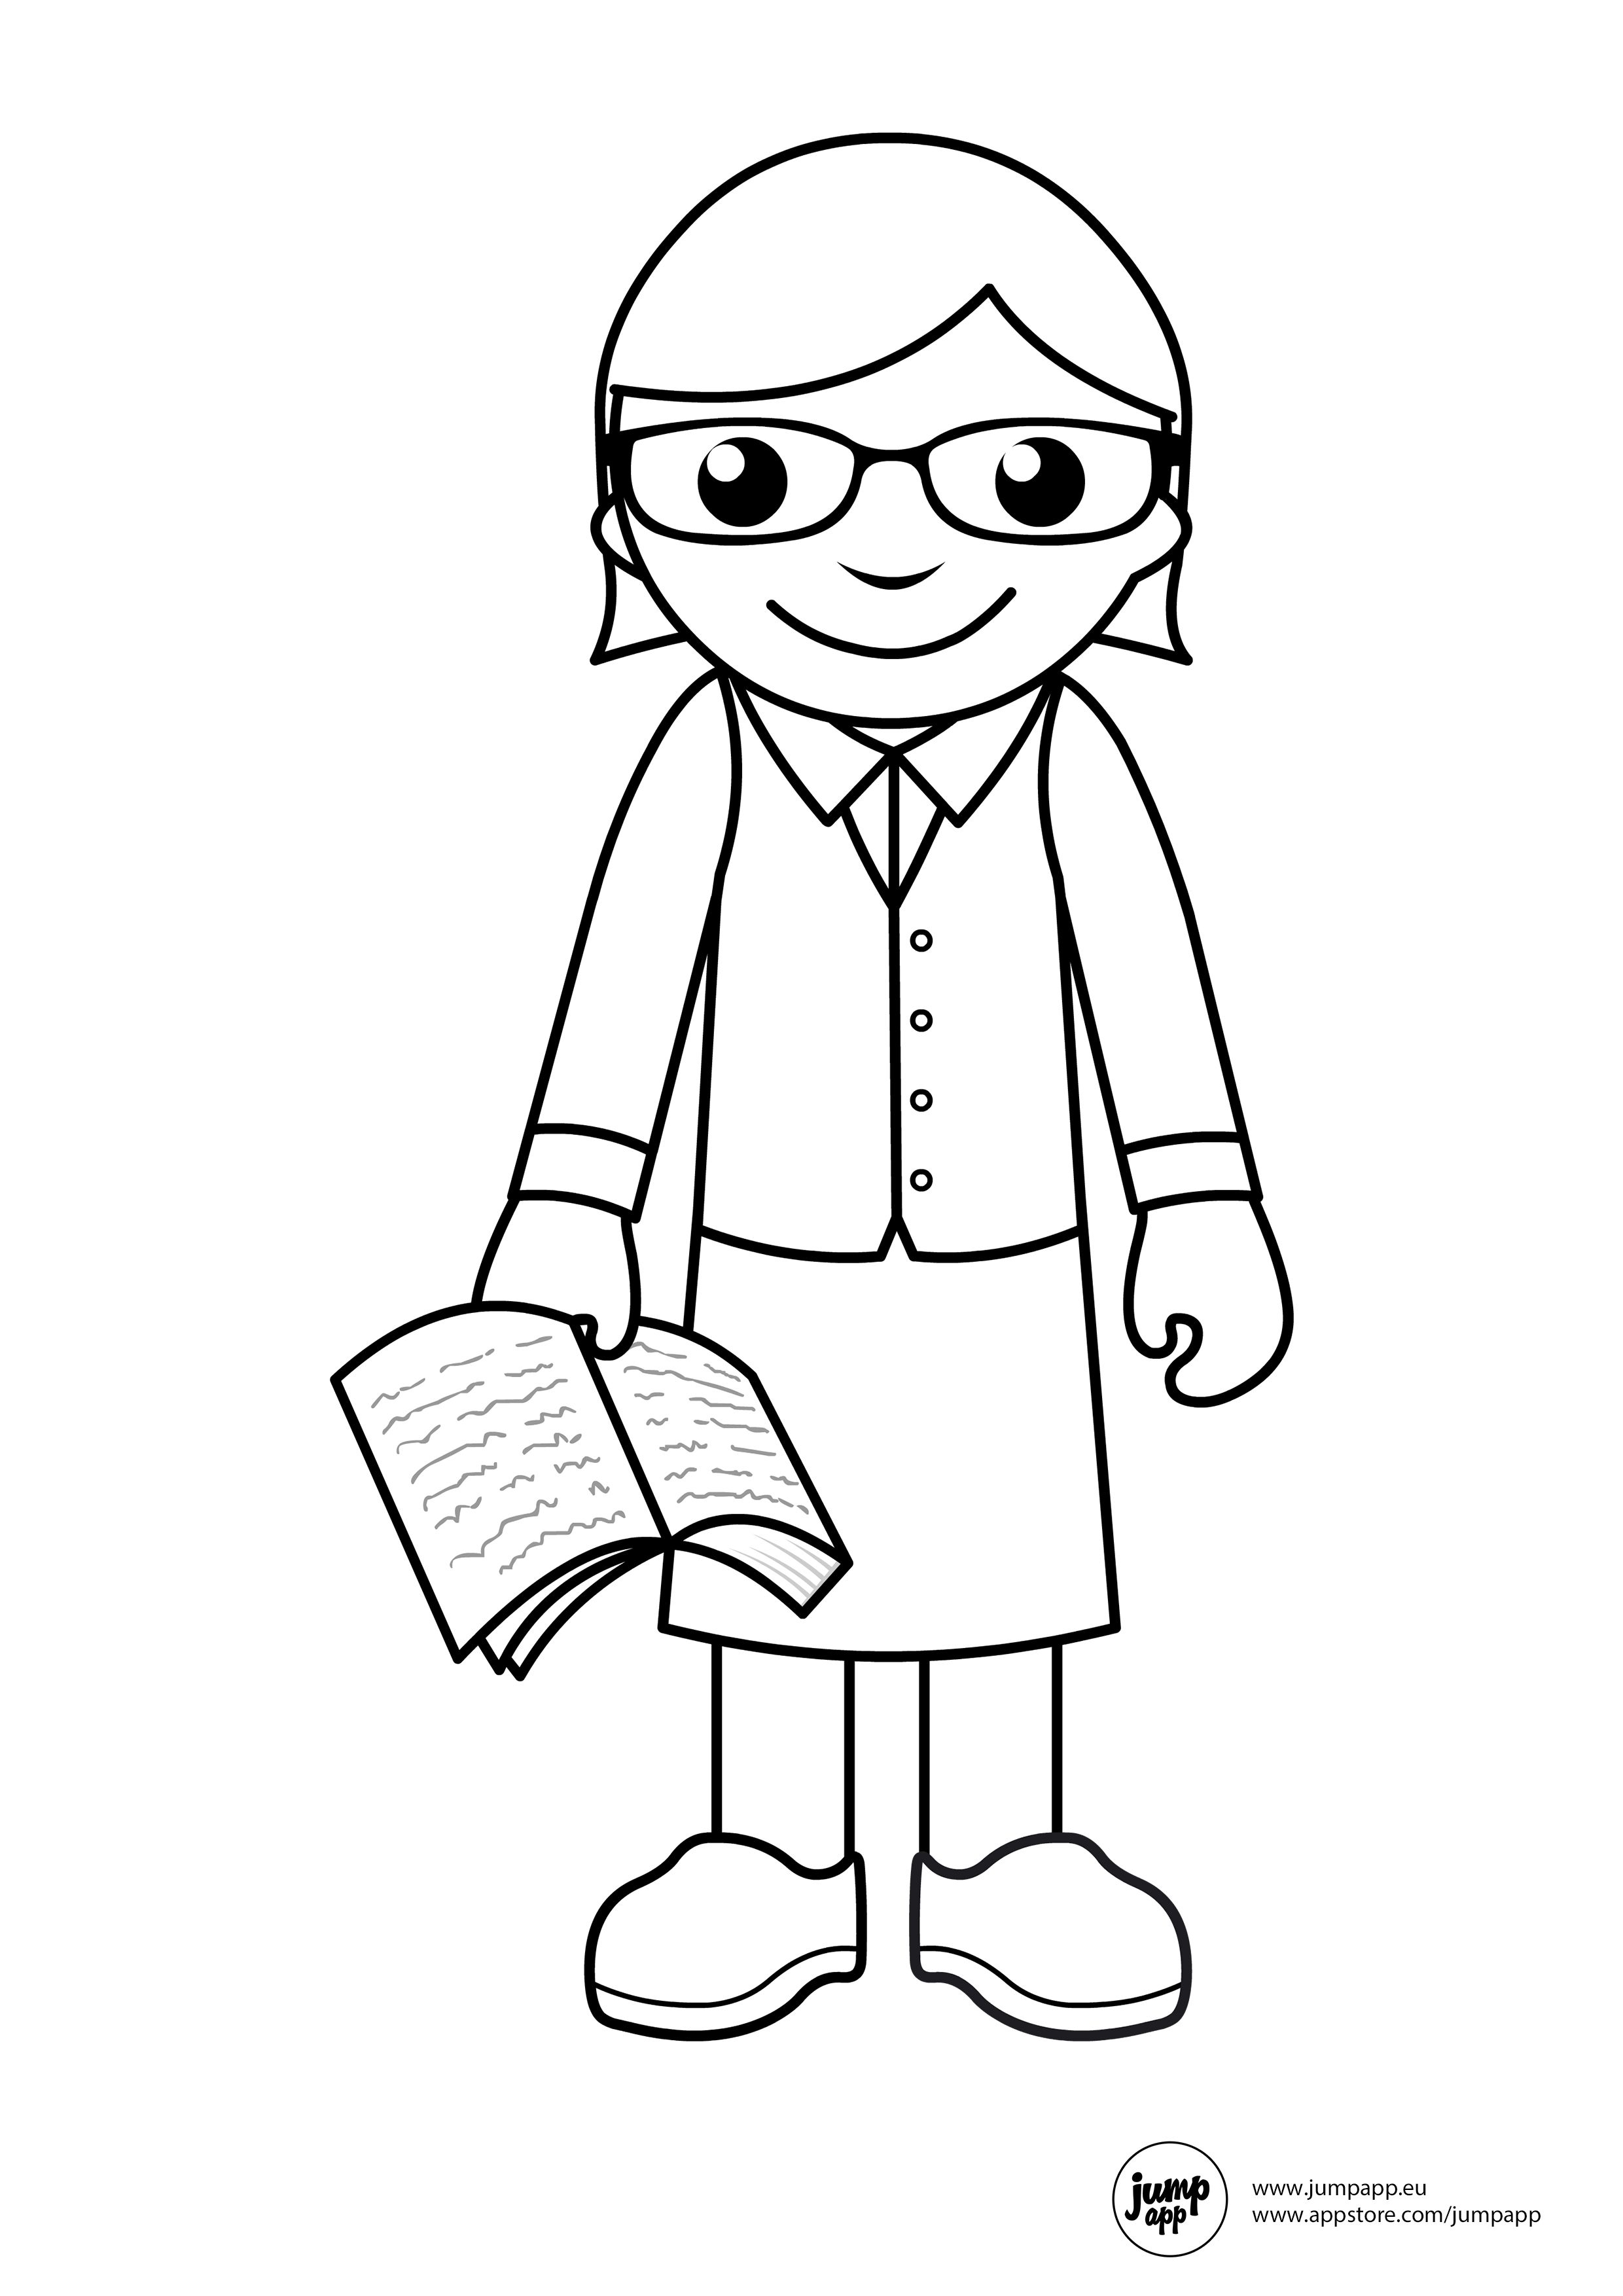 Coloring Pages Teacher Community Helpers Coloring Pages With Teacher Printable Coloring